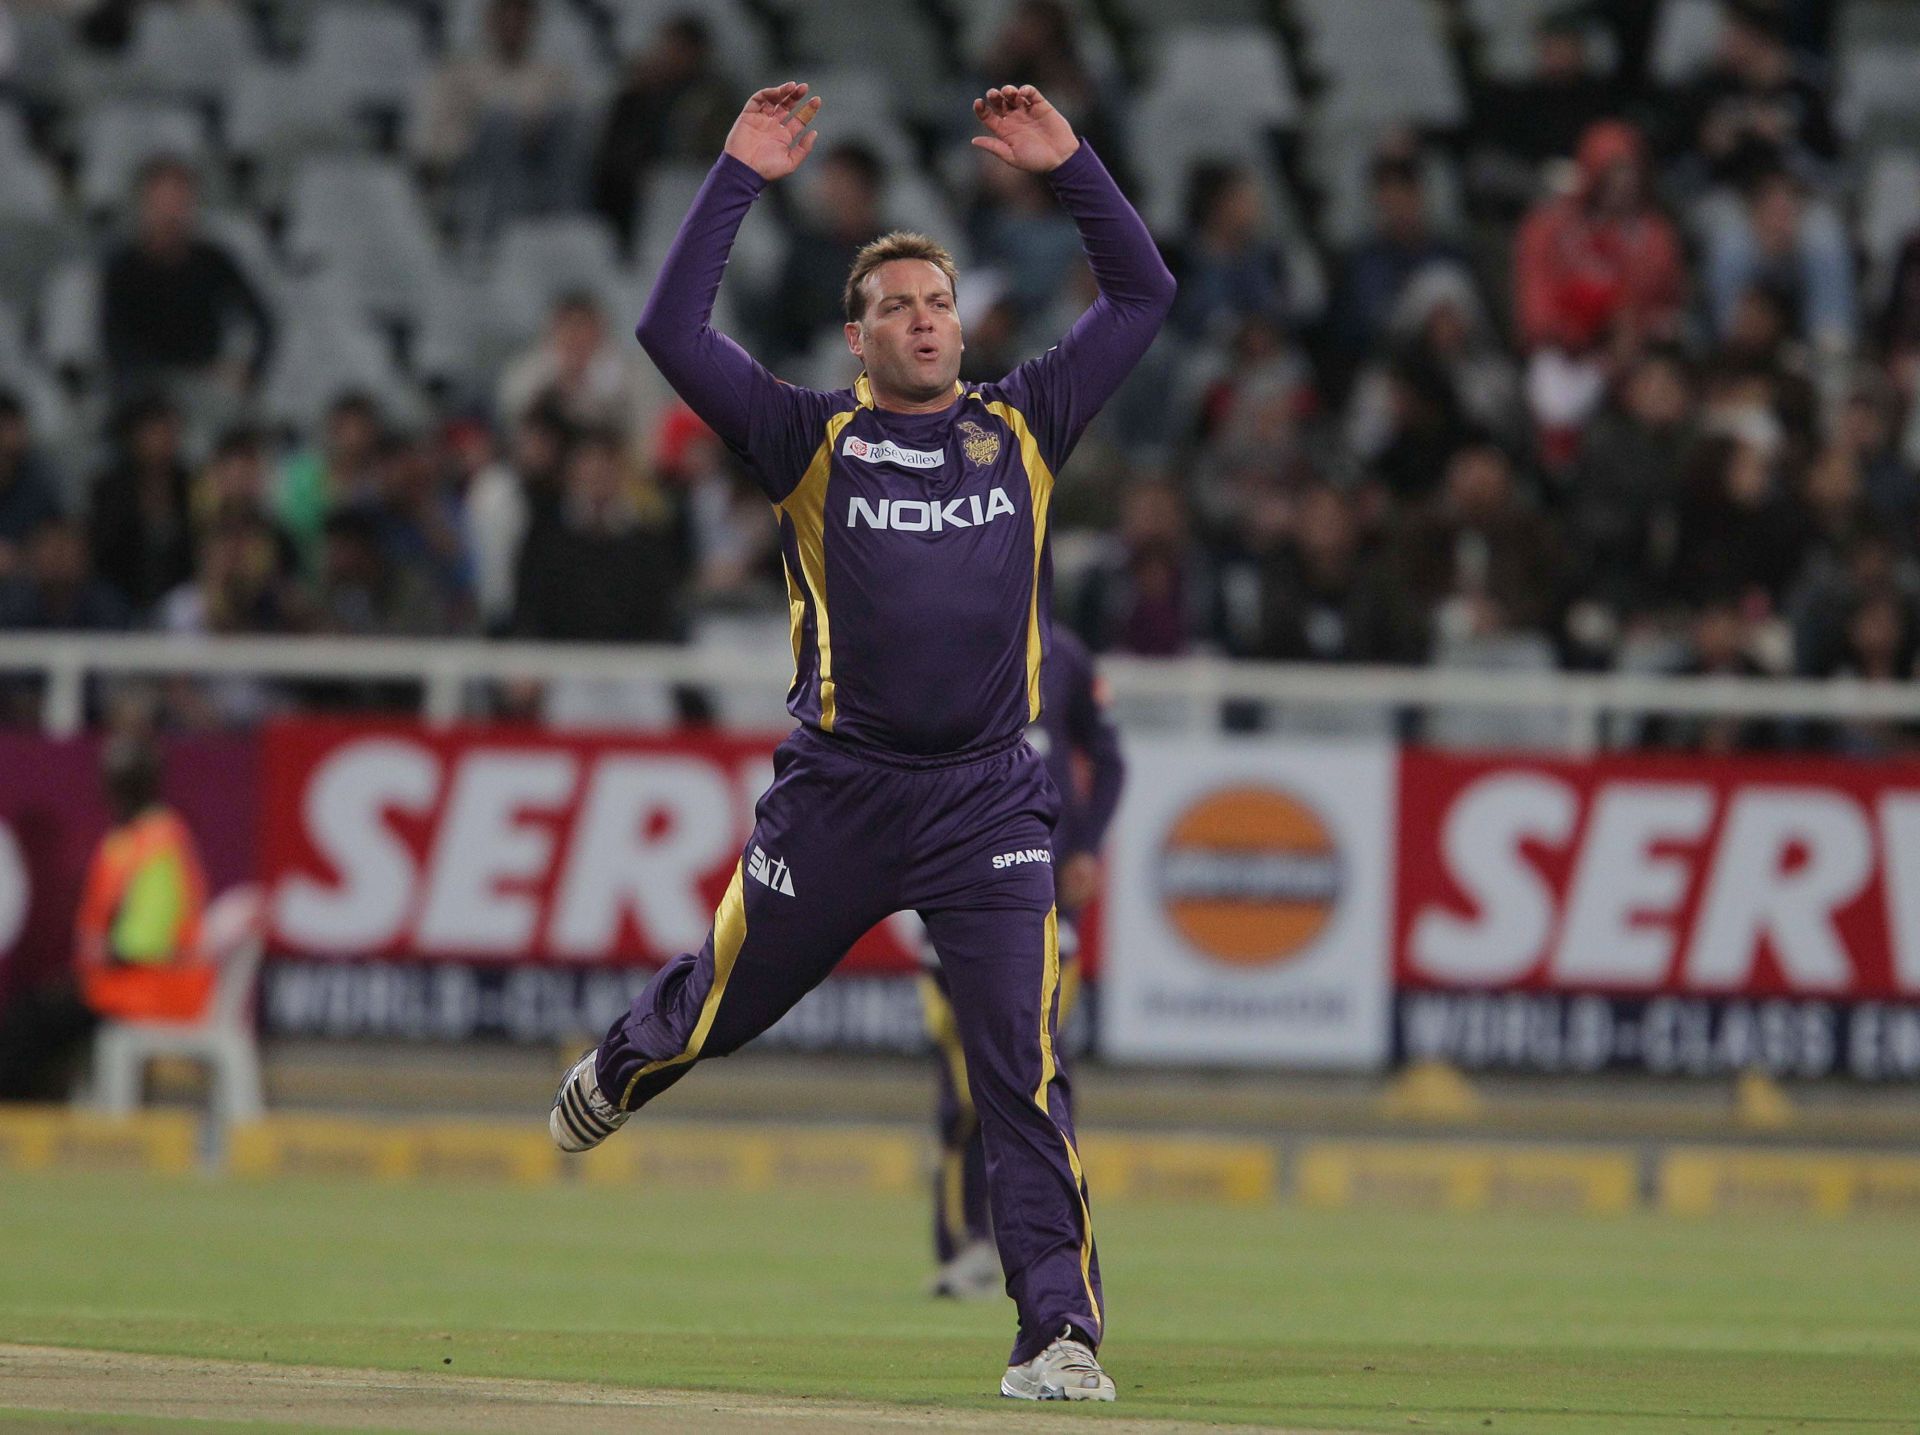 Jacques Kallis scored 69 and picked up a wicket in the IPL 2012 final. (Image Credit: Getty Images)